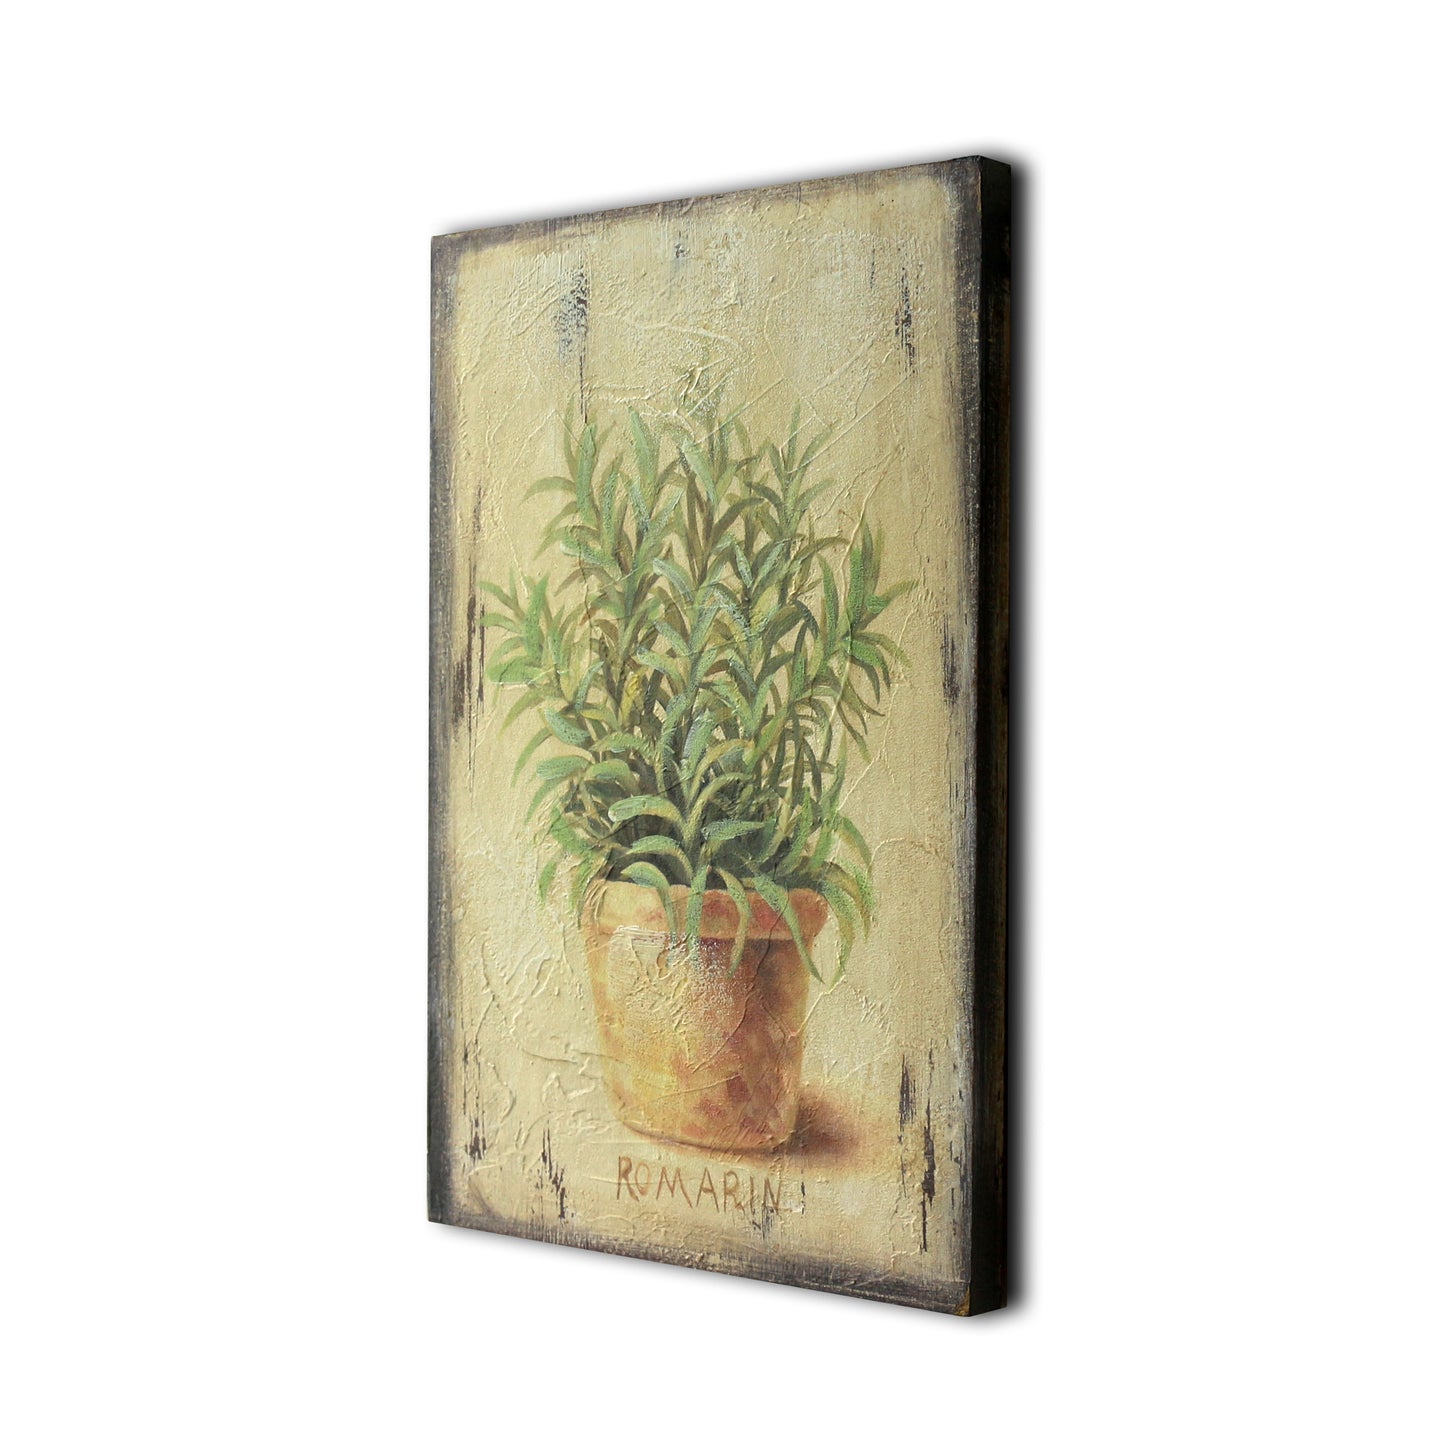 CVHOMEDECO. Rustic Vintage Hand Painted Wooden Frame Wall Hanging 3D Painting Decoration Art, Plant in Terracotta Design, 8 x 12 Inch